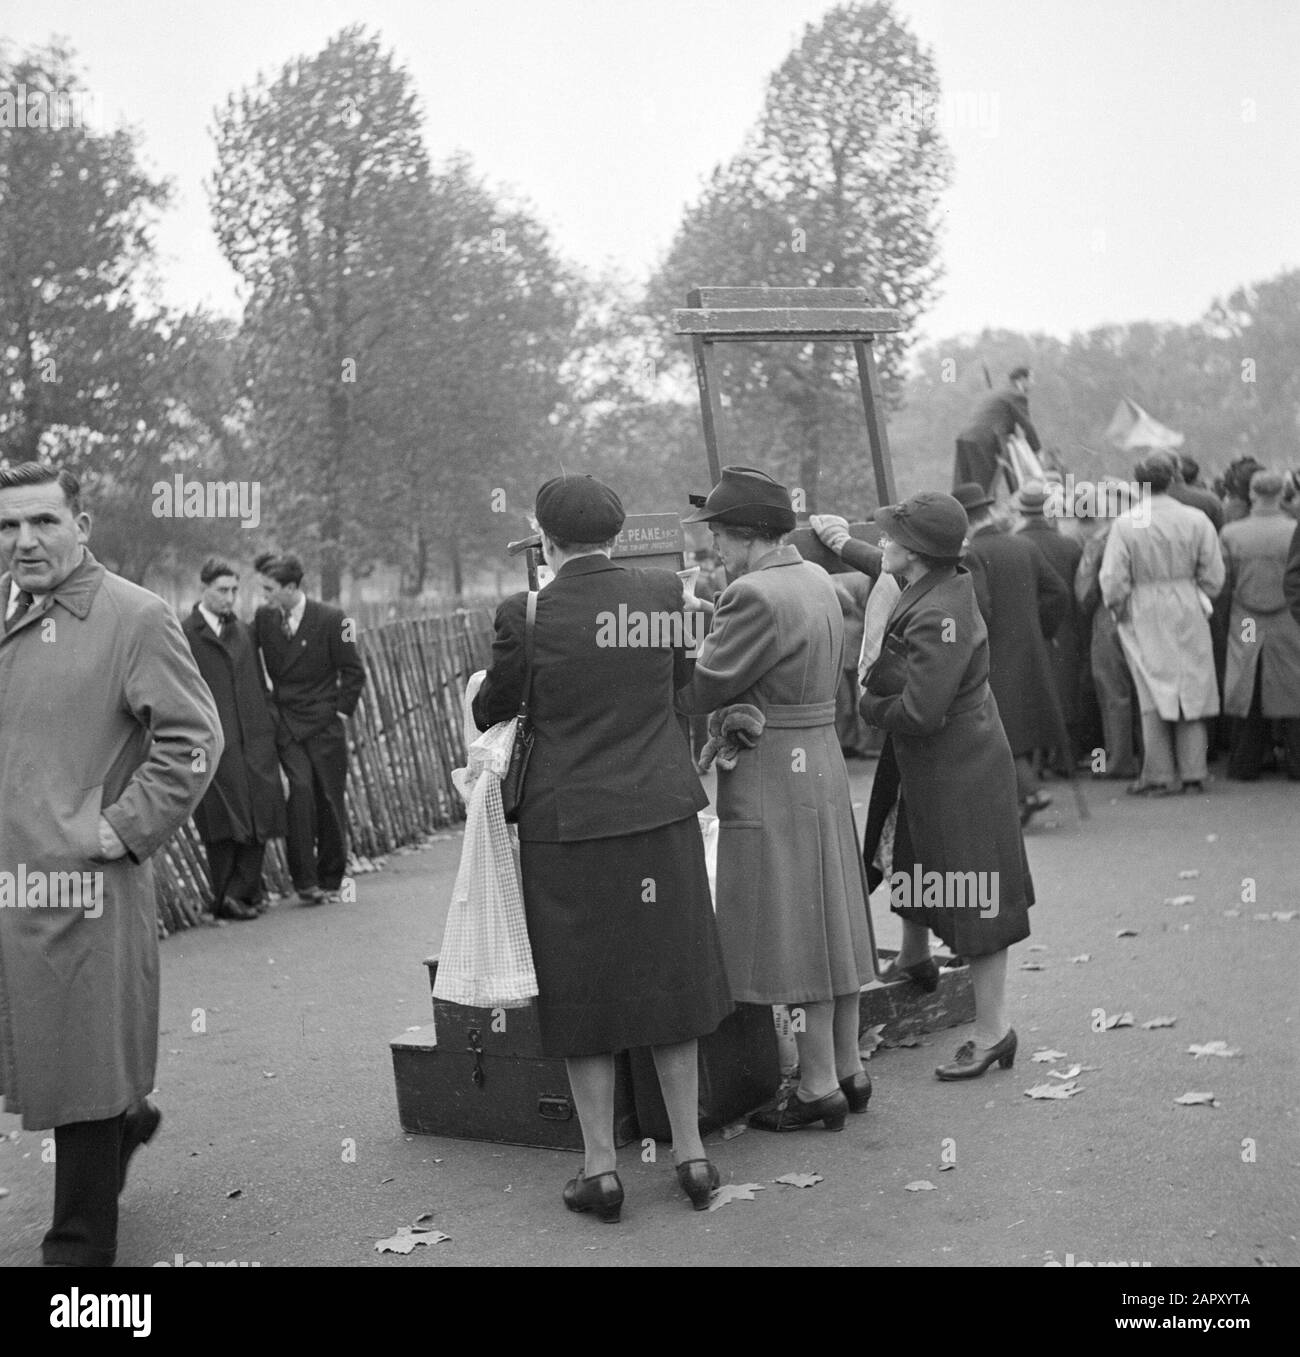 Reportage London Women at the Speakers' Corner in Hyde Park Date: 1947  Location: Great Britain, London Keywords: parks, speeches, women Stock  Photo - Alamy